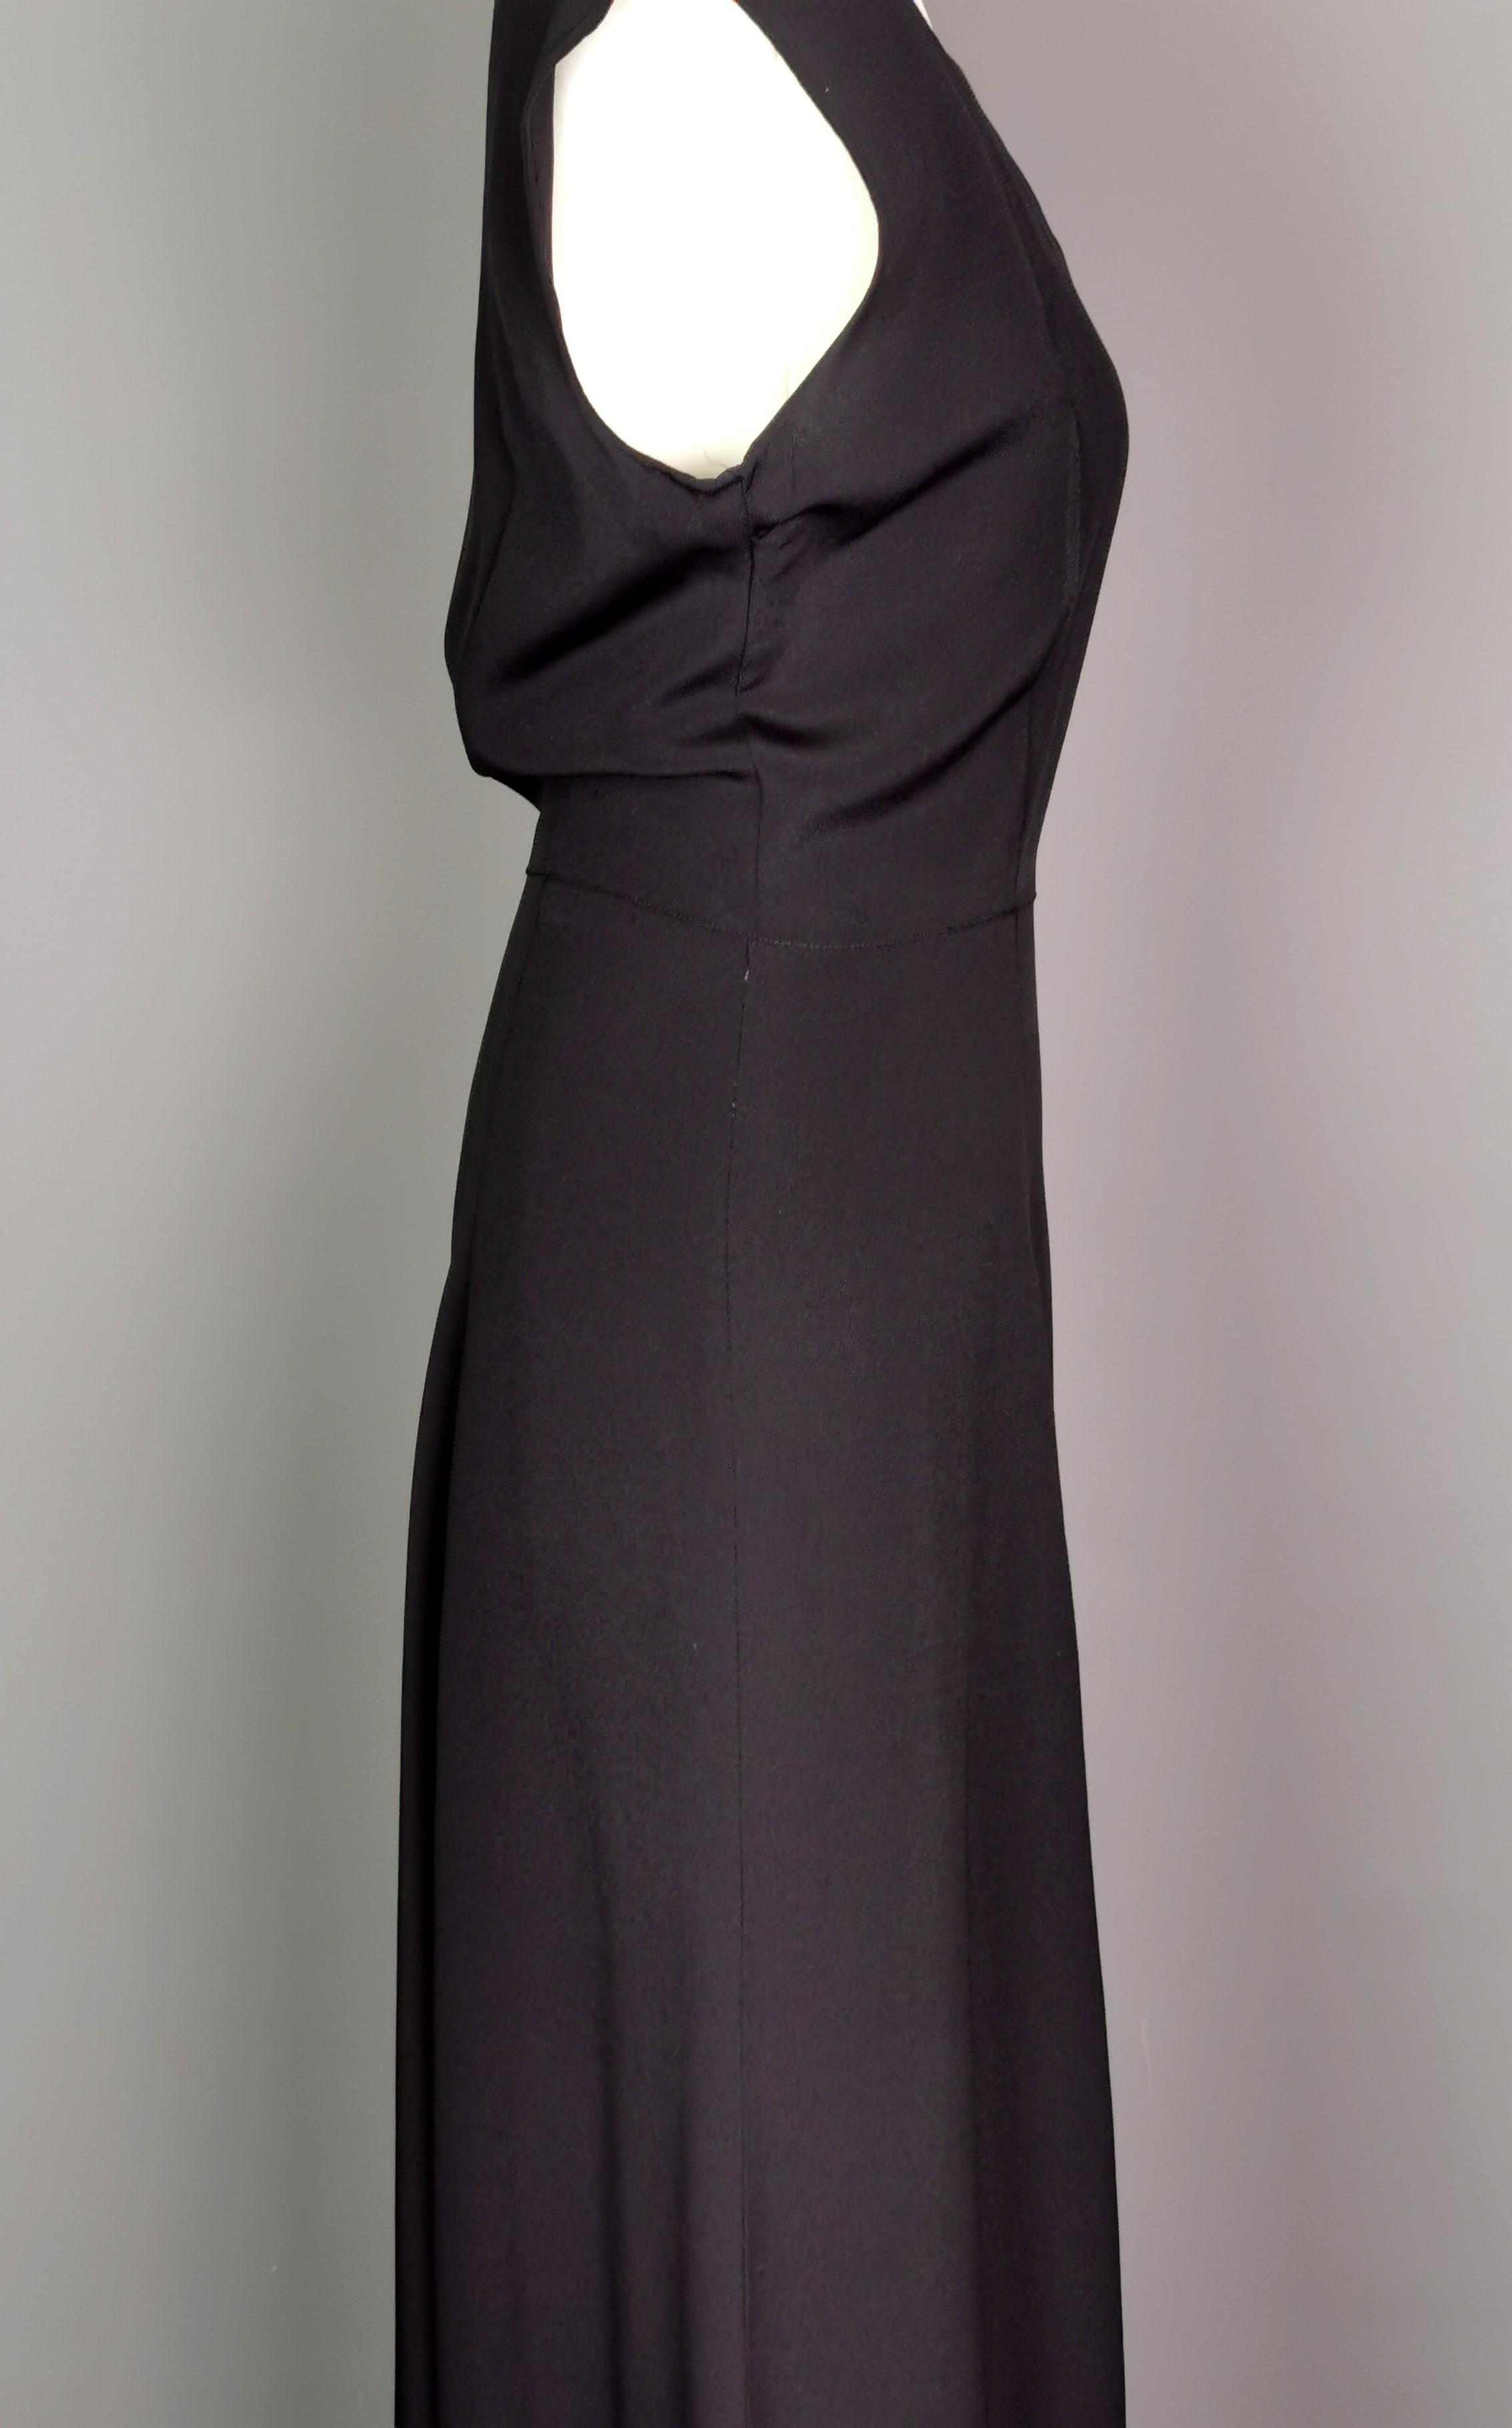 Vintage 1930s Black rayon crepe bombshell dress, gold lame, evening gown  For Sale 4